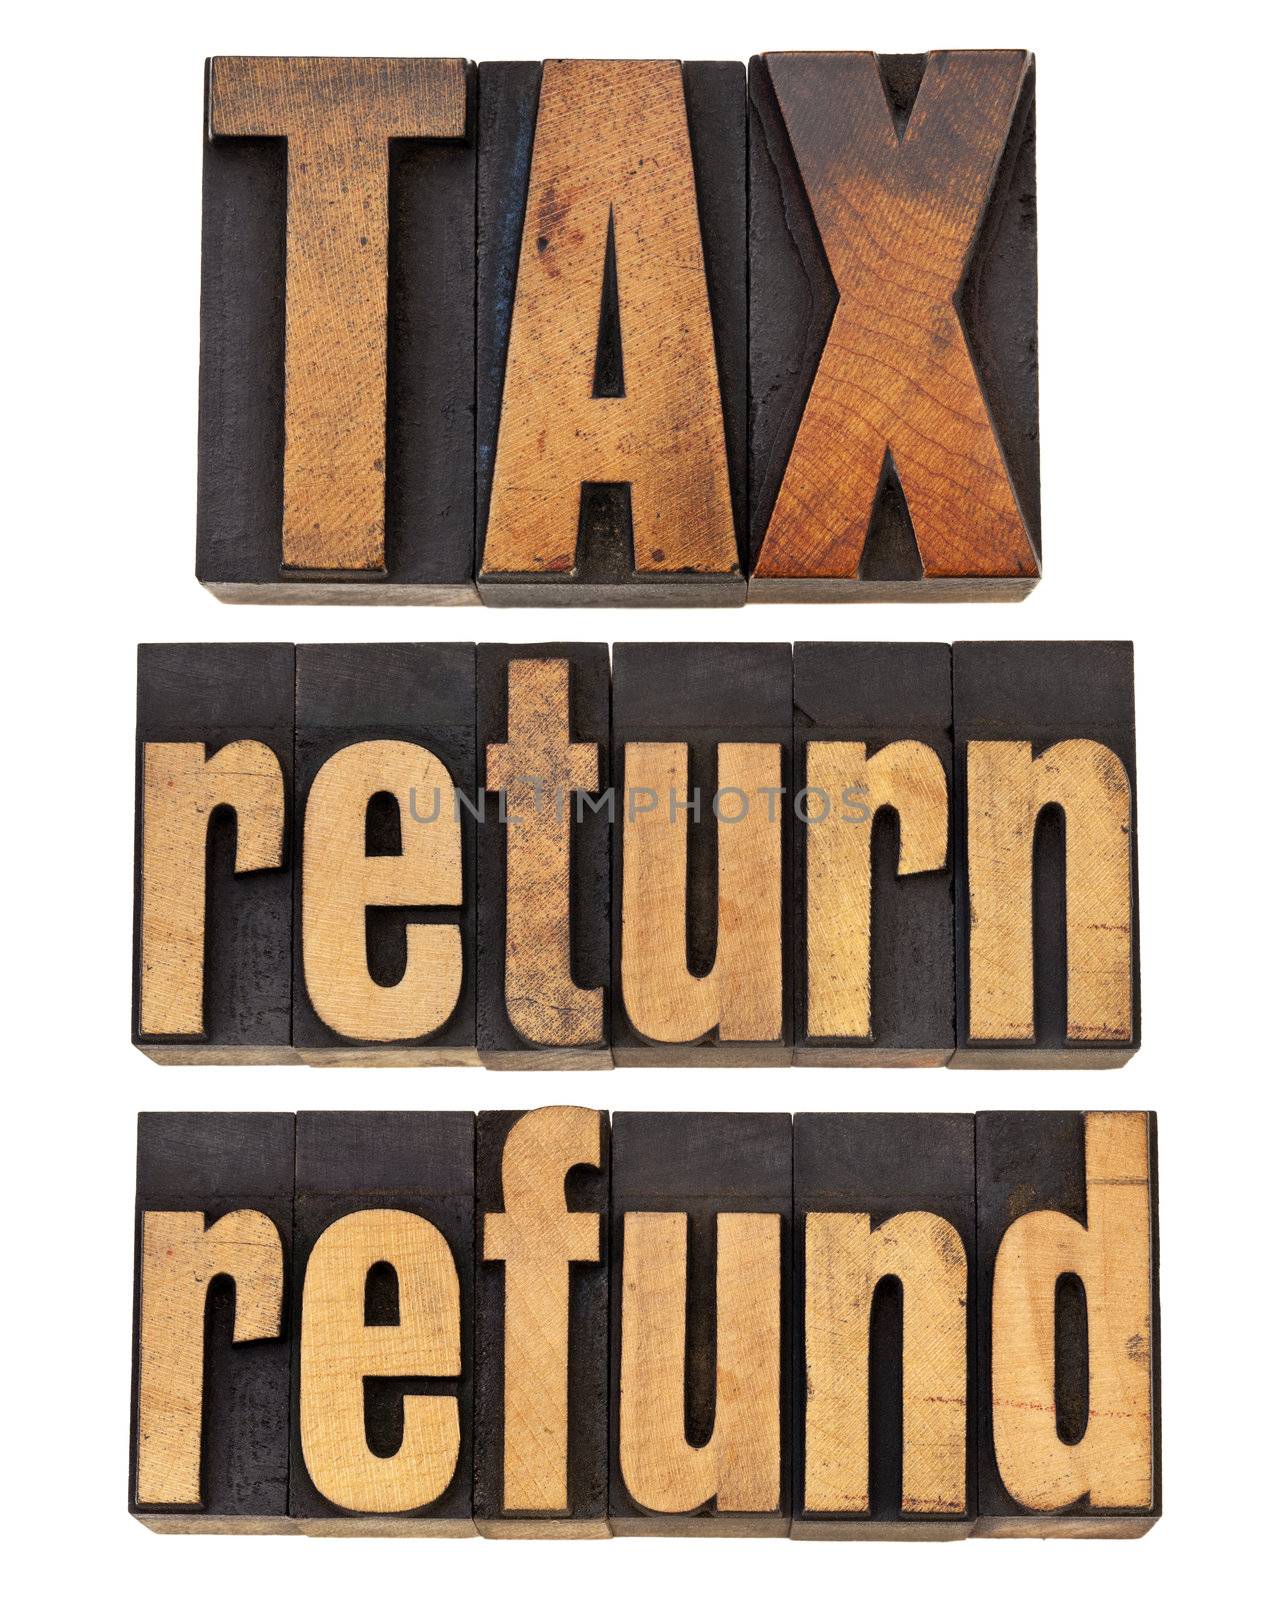 tax, return and refund - financial concept -  isolated words in vintage wood type